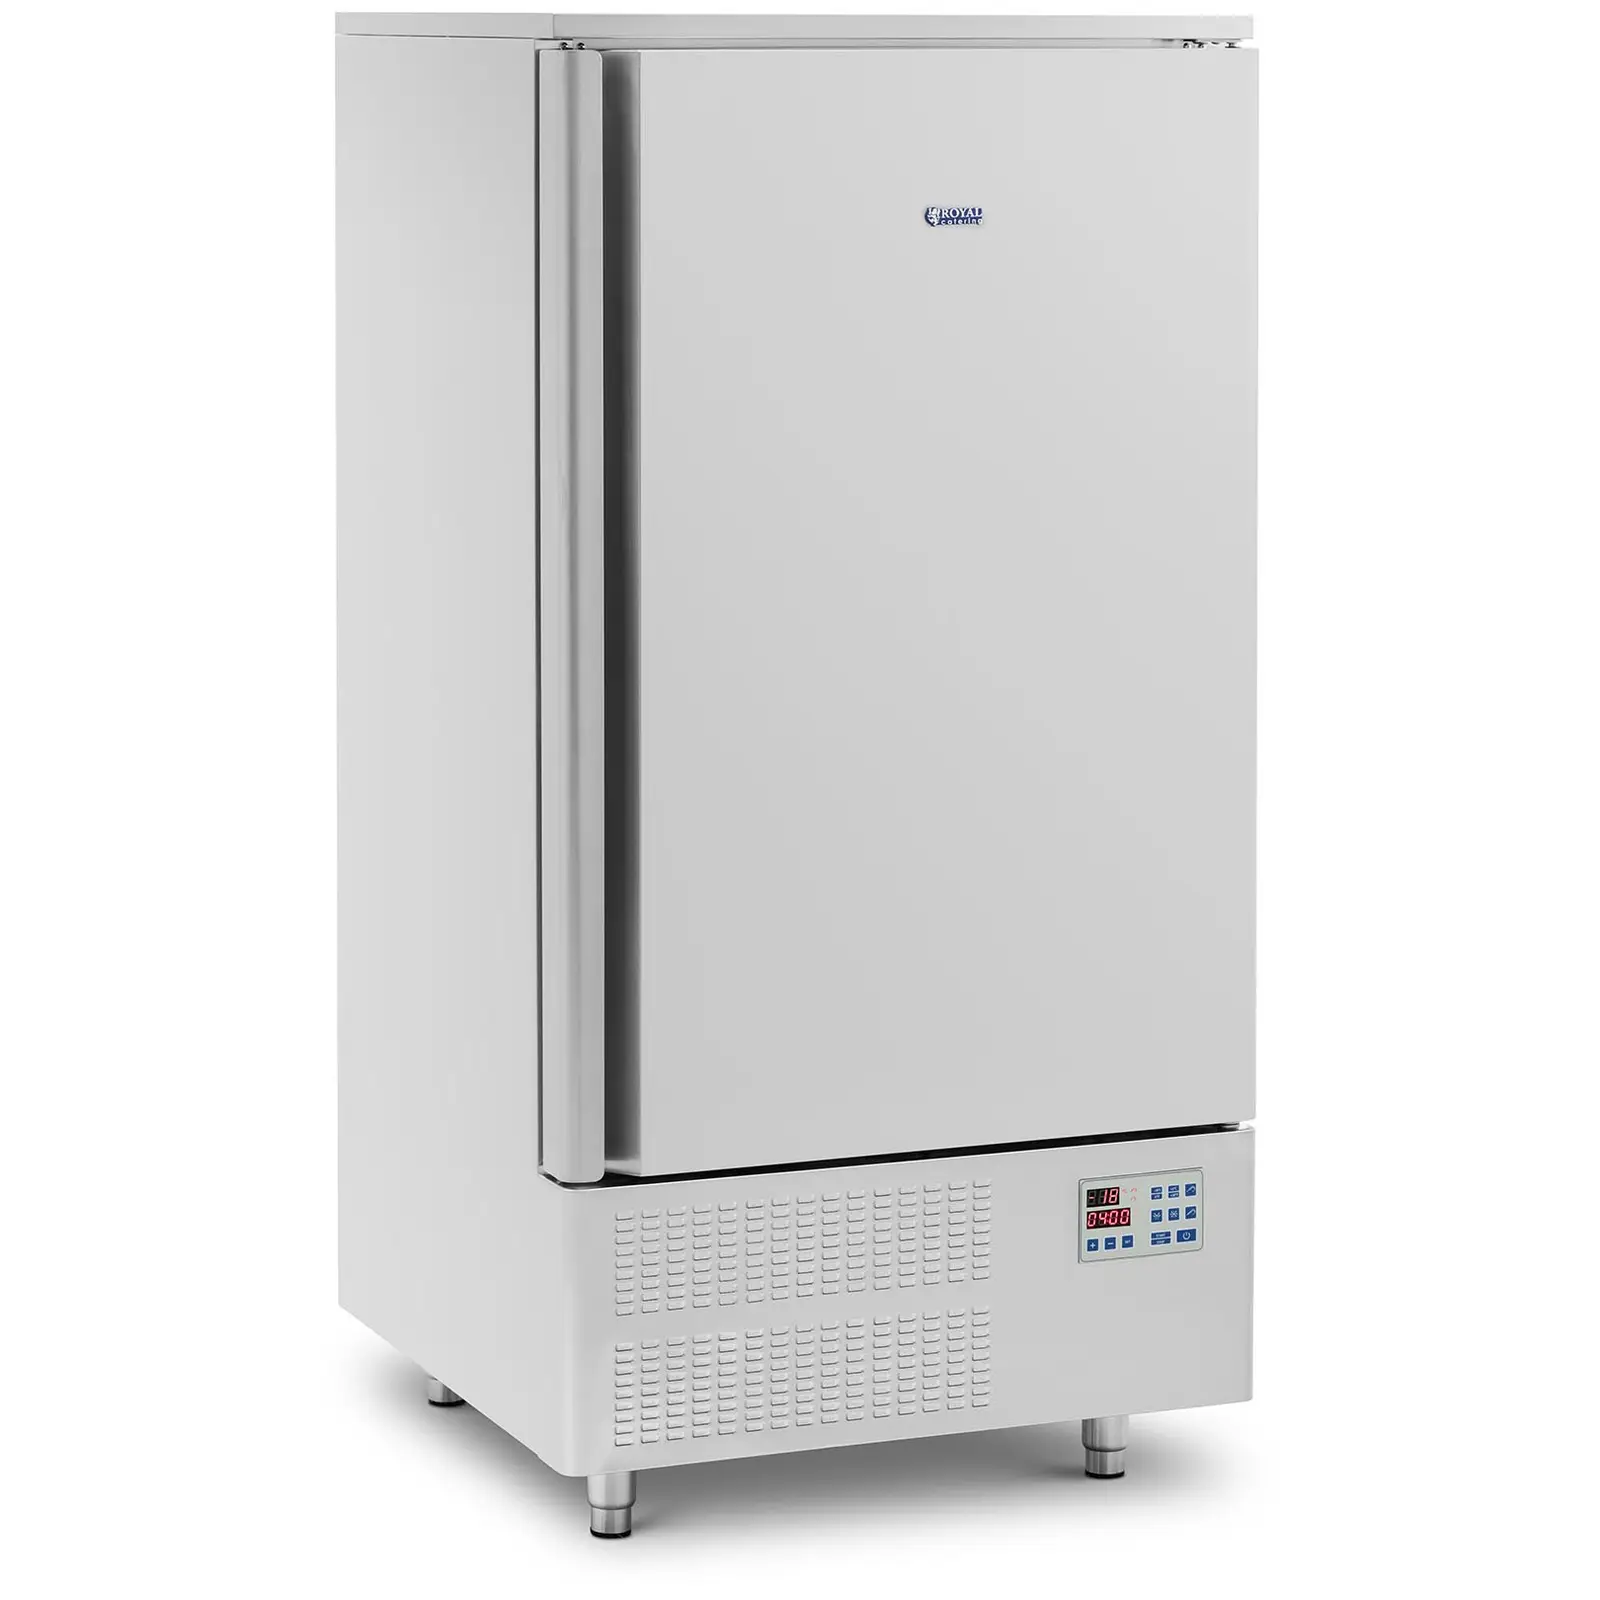 Blast Chiller  - 276 L - Royal Catering - cooling and freezing function - stainless steel